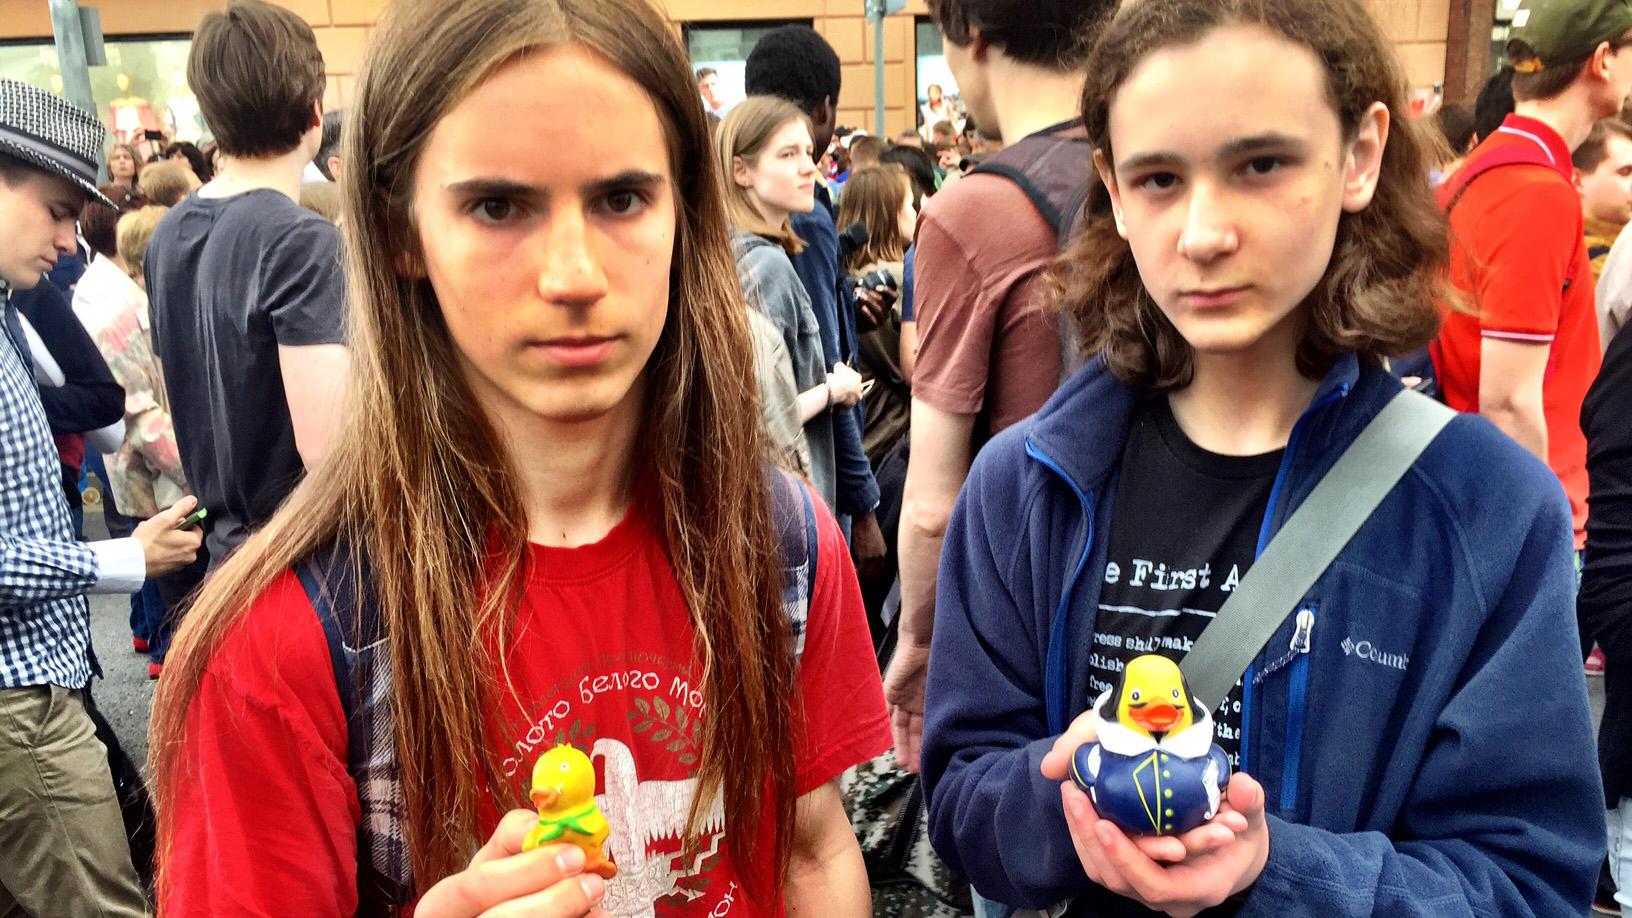 Young protesters in Moscow holding up rubber ducks, which have become symbolic of corruption